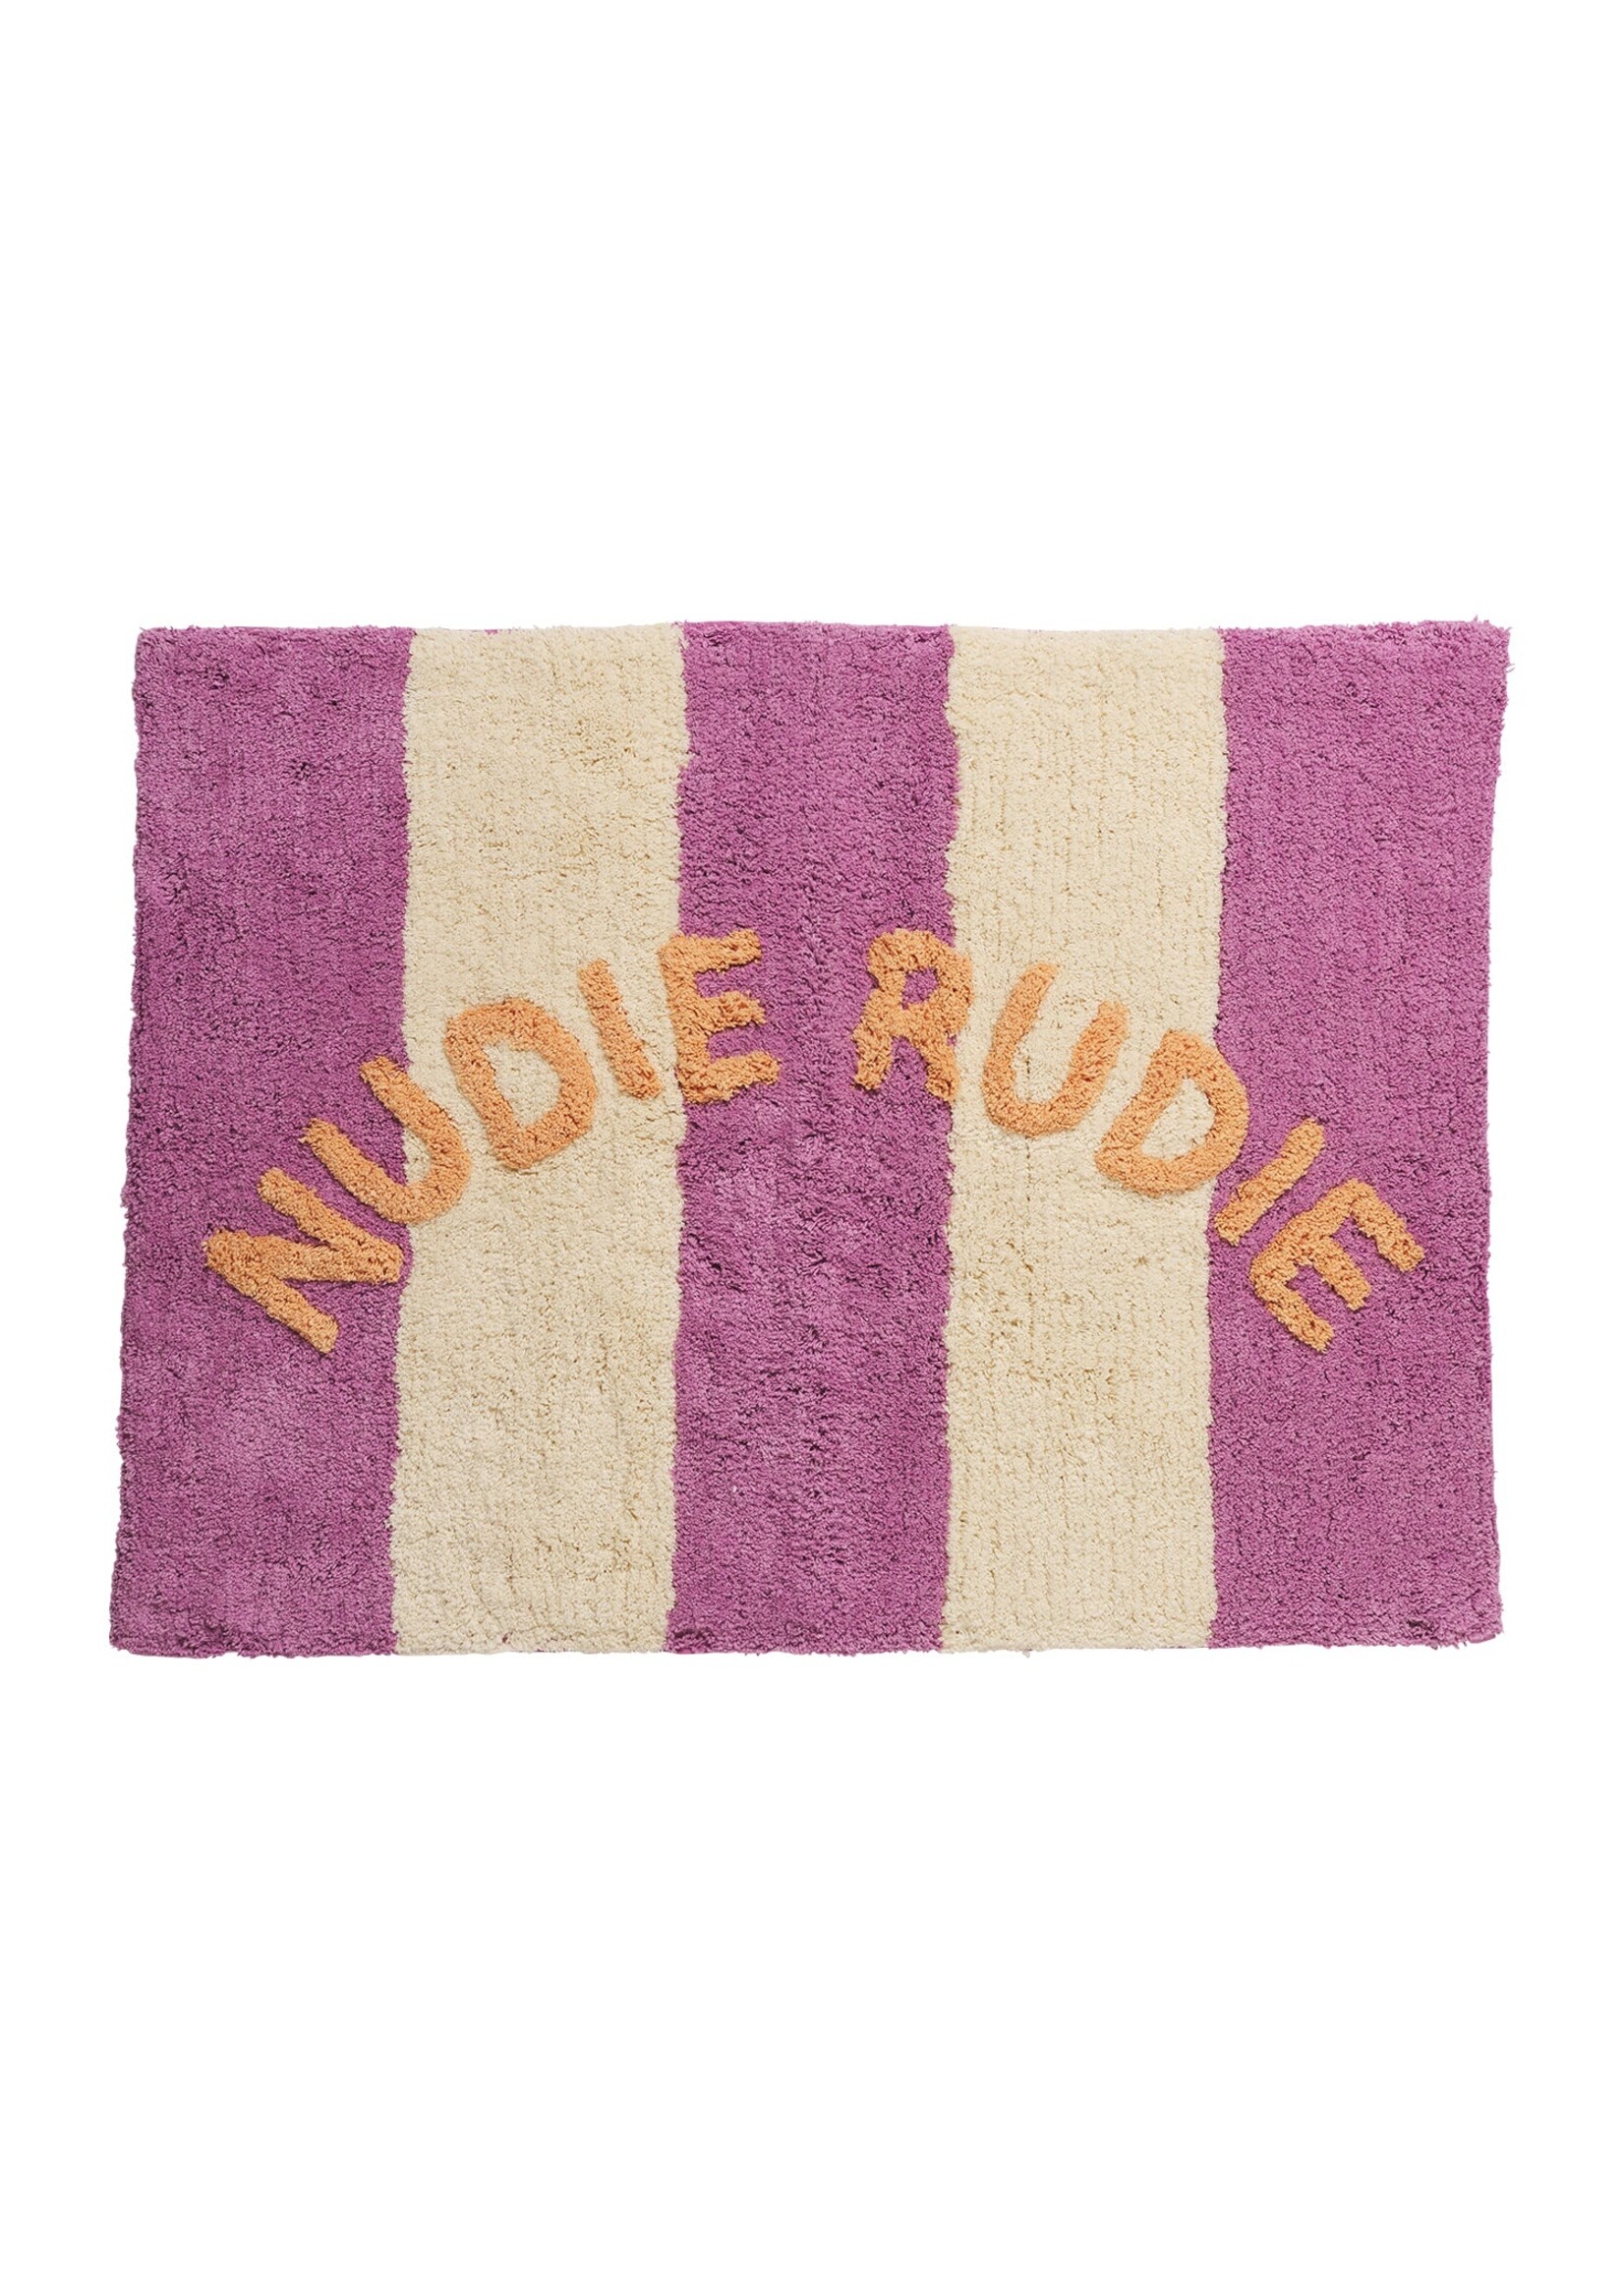 Sage and Clare Didcot Nudie Bath Mat - Orchid